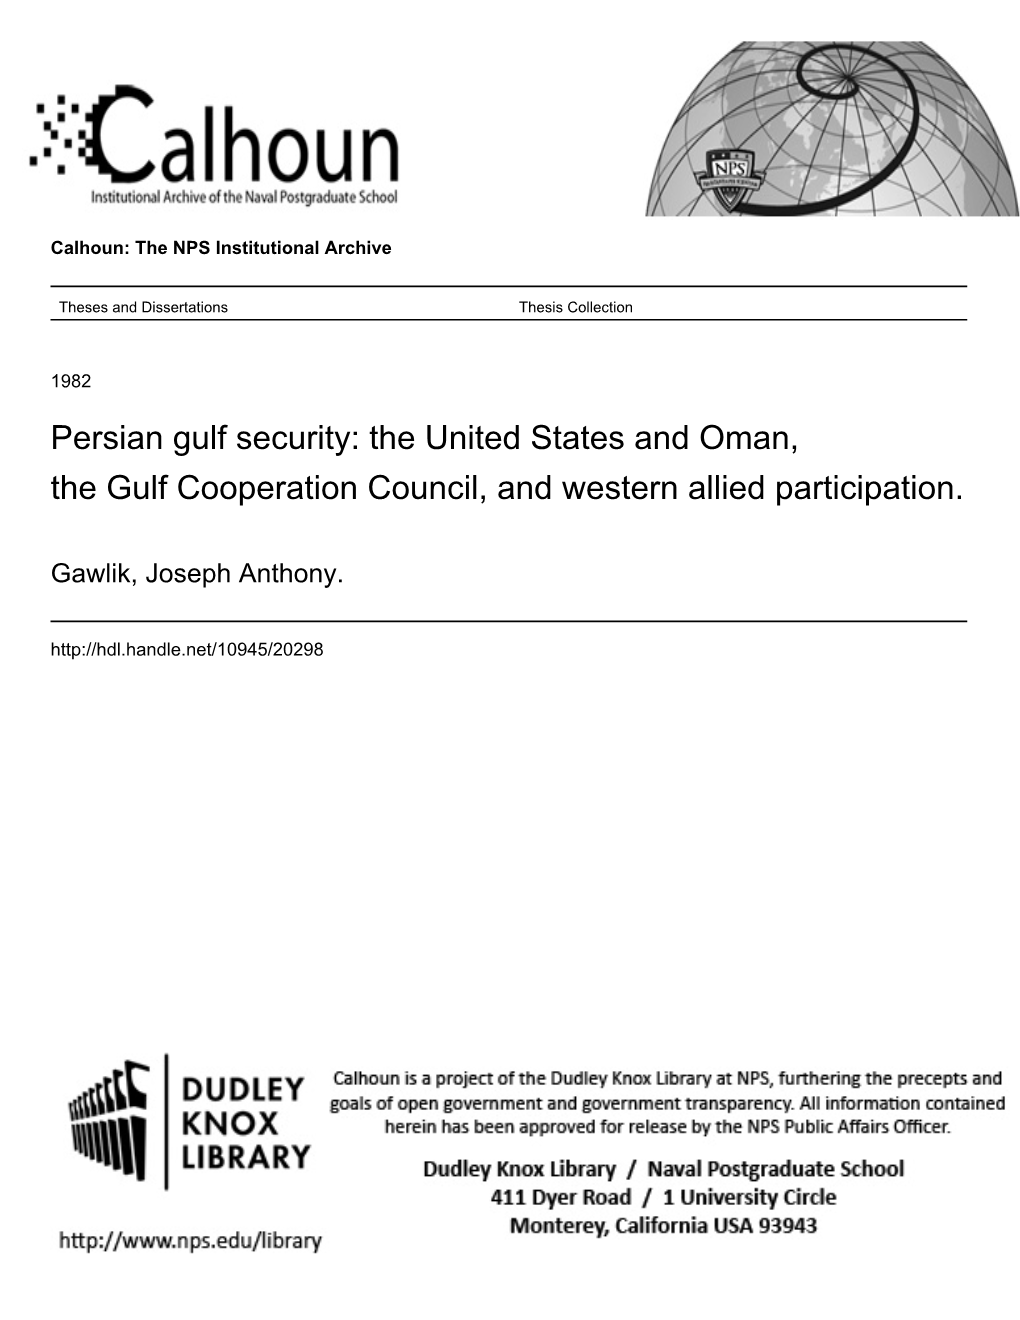 Persian Gulf Security: the United States and Oman, the Gulf Cooperation Council, and Western Allied Participation